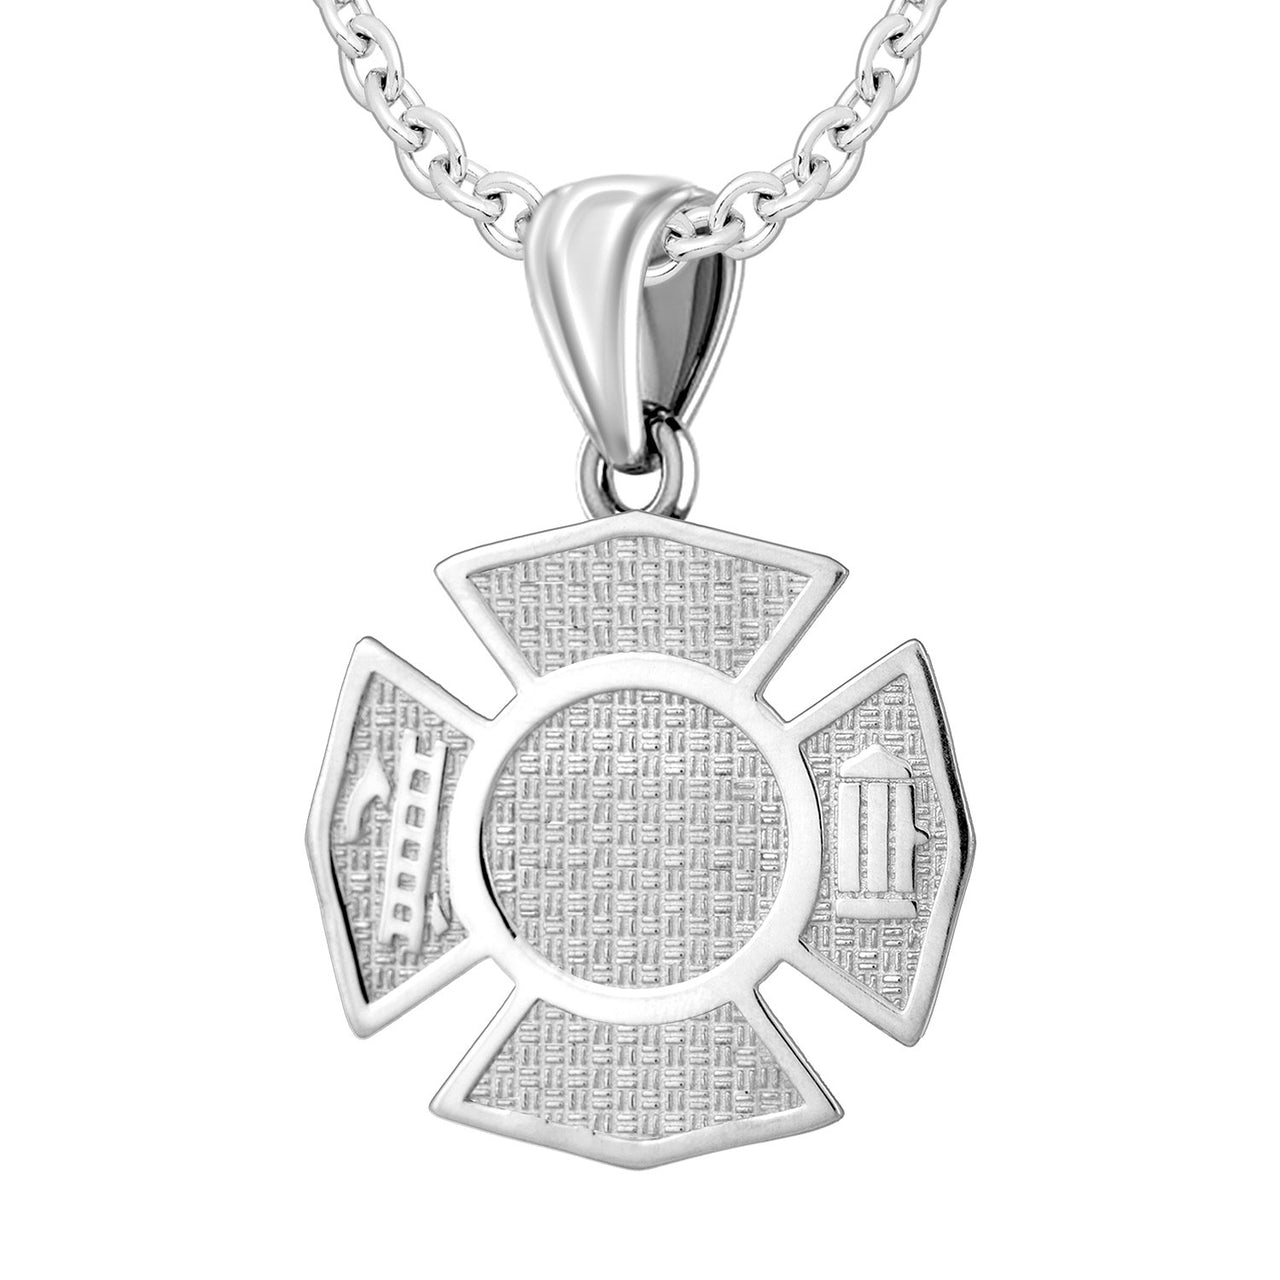 Men's 925 Sterling Silver Customizable Firefighter Pendant Necklace, 32mm